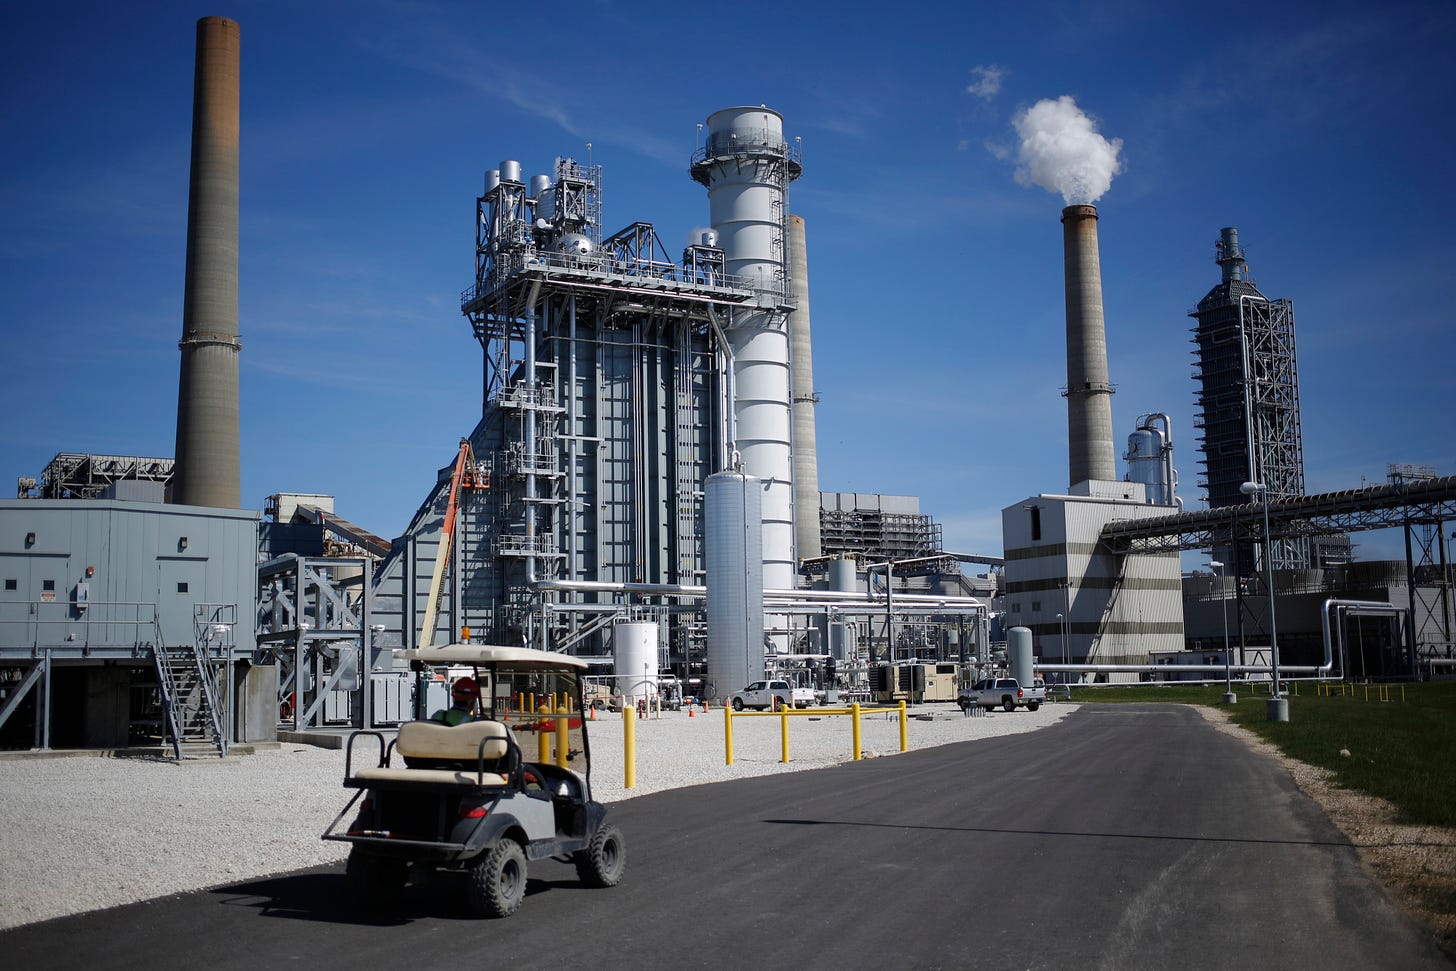 The Petra Nova Carbon Capture Project at the NRG Energy WA Parish generating station in Thompsons, Texas.